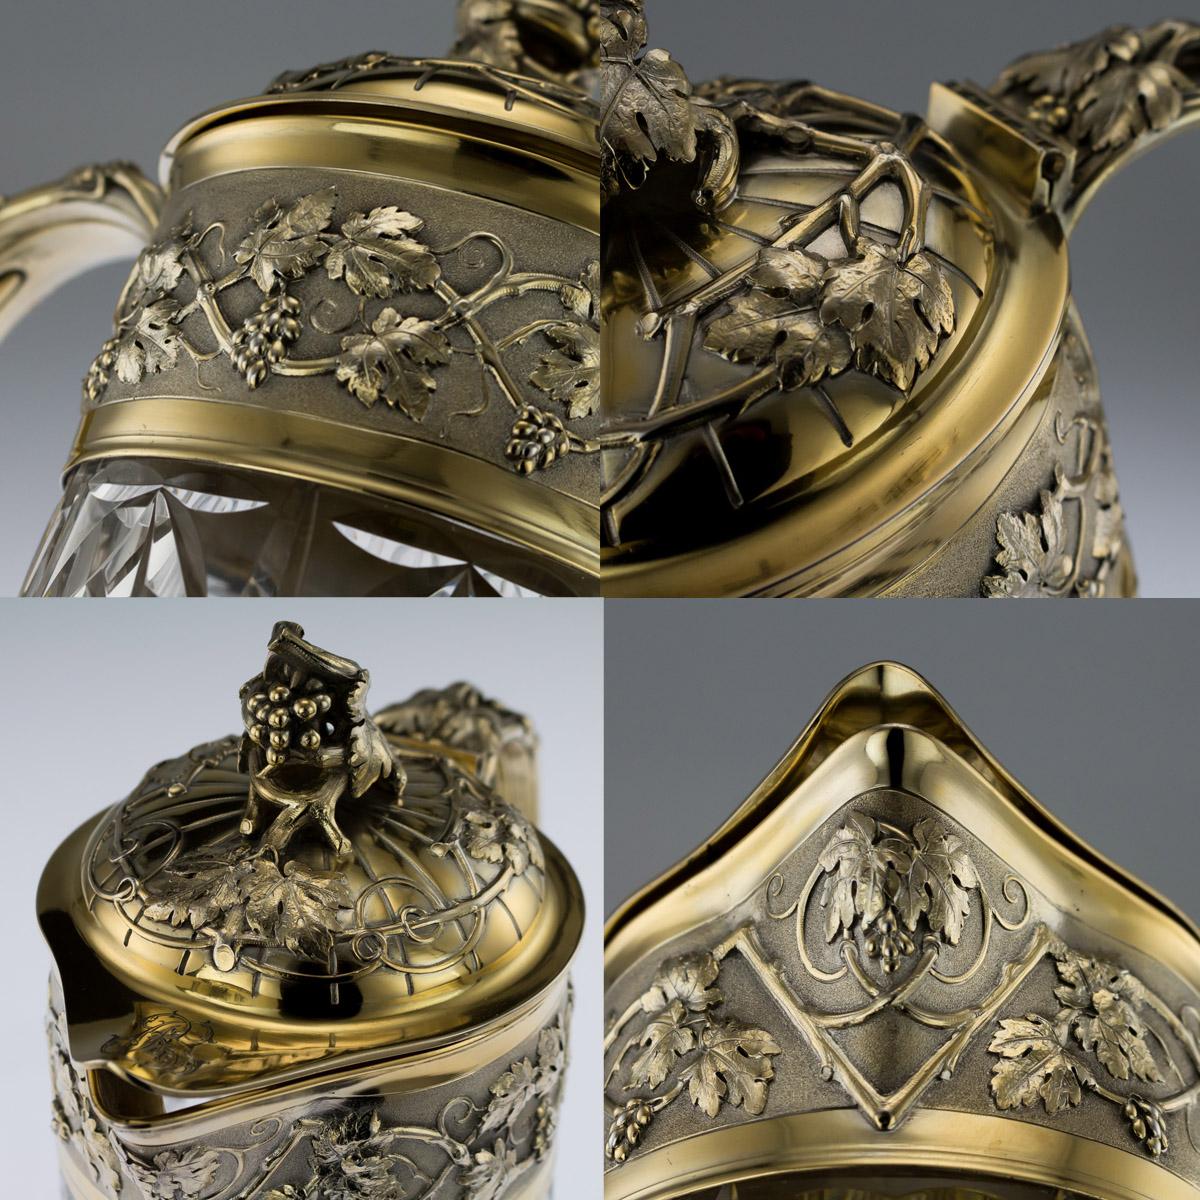 20th Century French Solid Silver-Gilt & Cut Glass Claret Jug, Odiot, circa 1910 5